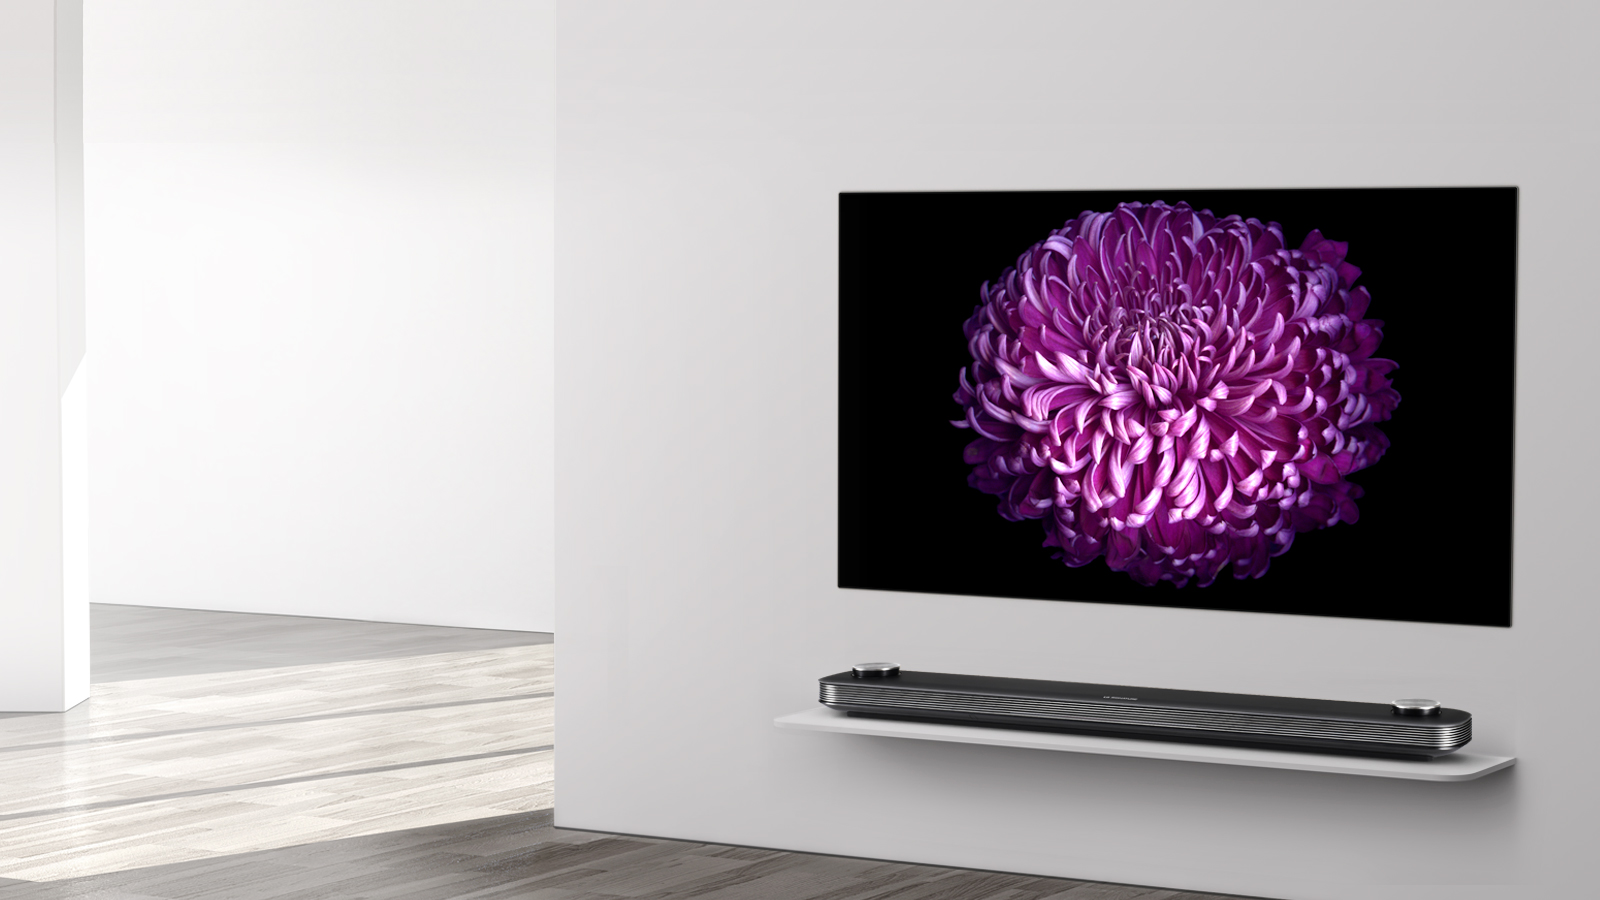 LG's wallpaper TV received praise and grabbed a lot of attention at this year's Consumer Electronics Show in Las Vegas back in January. (Image: LG)